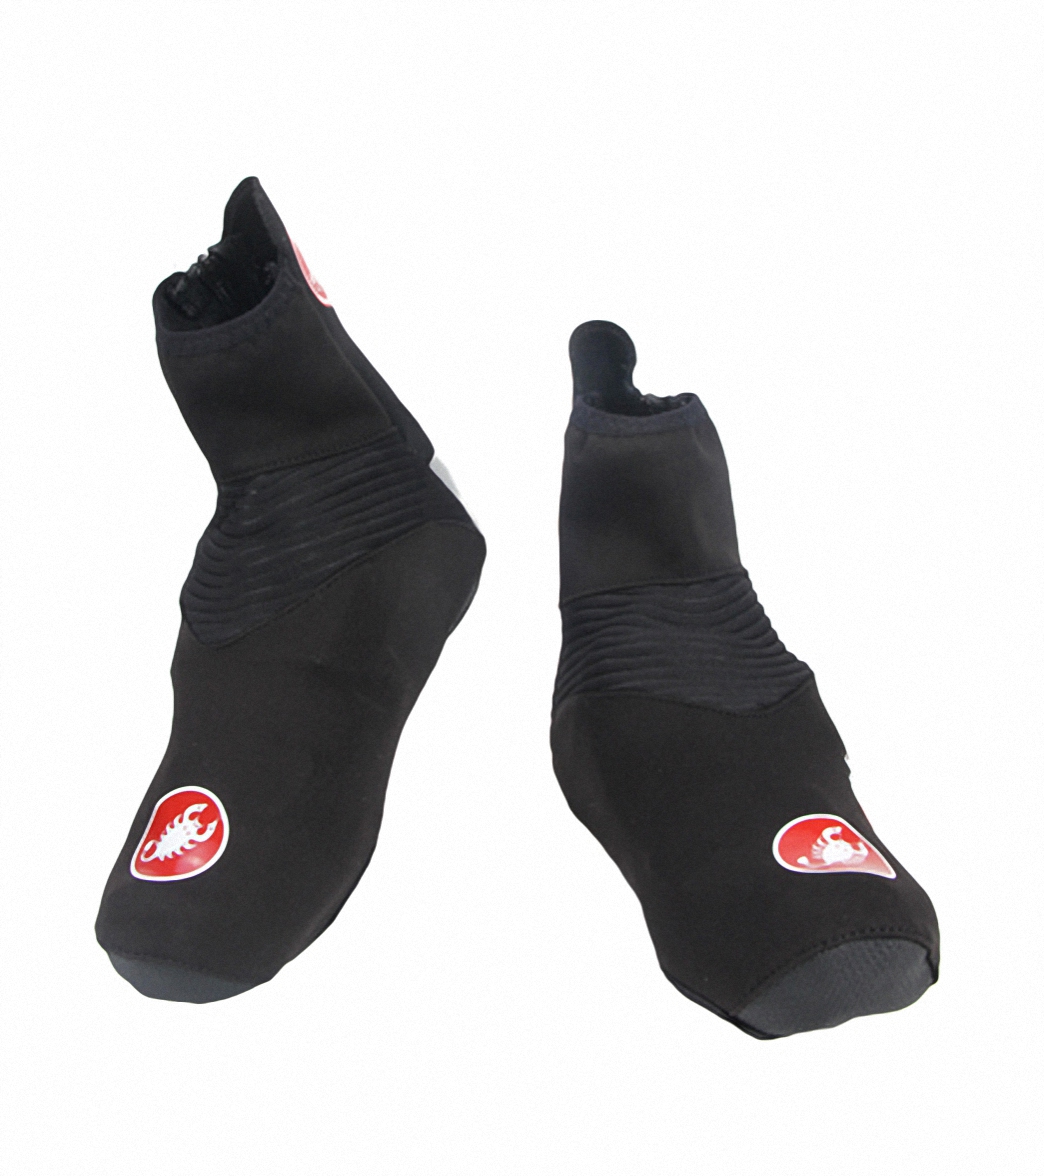 Castelli Narcisista Shoecover at 0 - Free Shipping